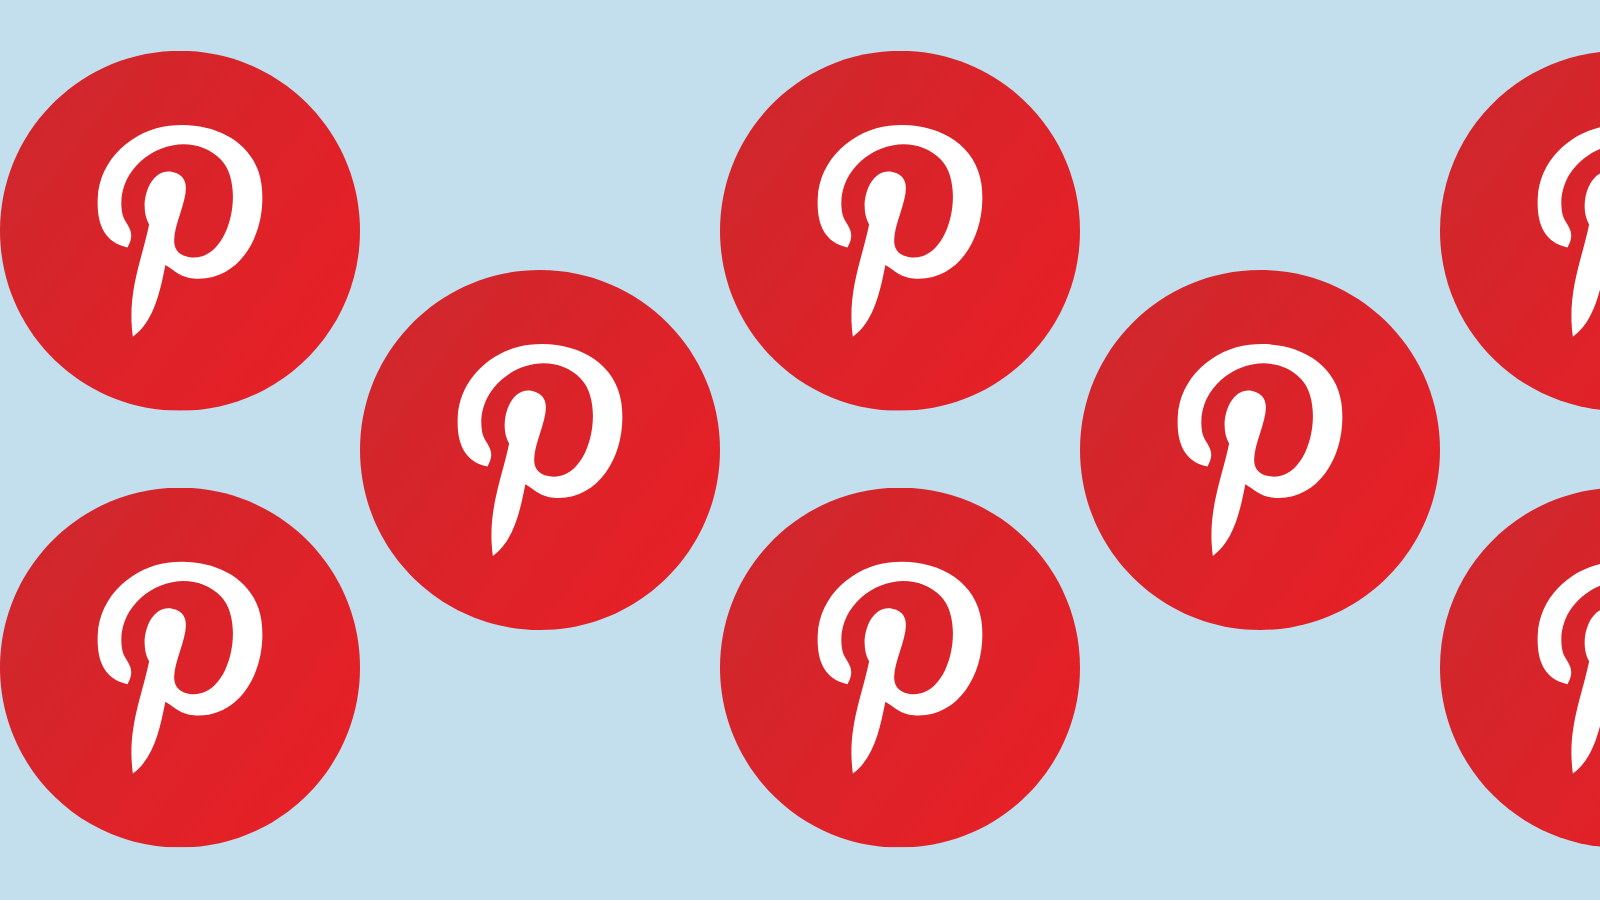 The Pinterest logo in a repeating pattern